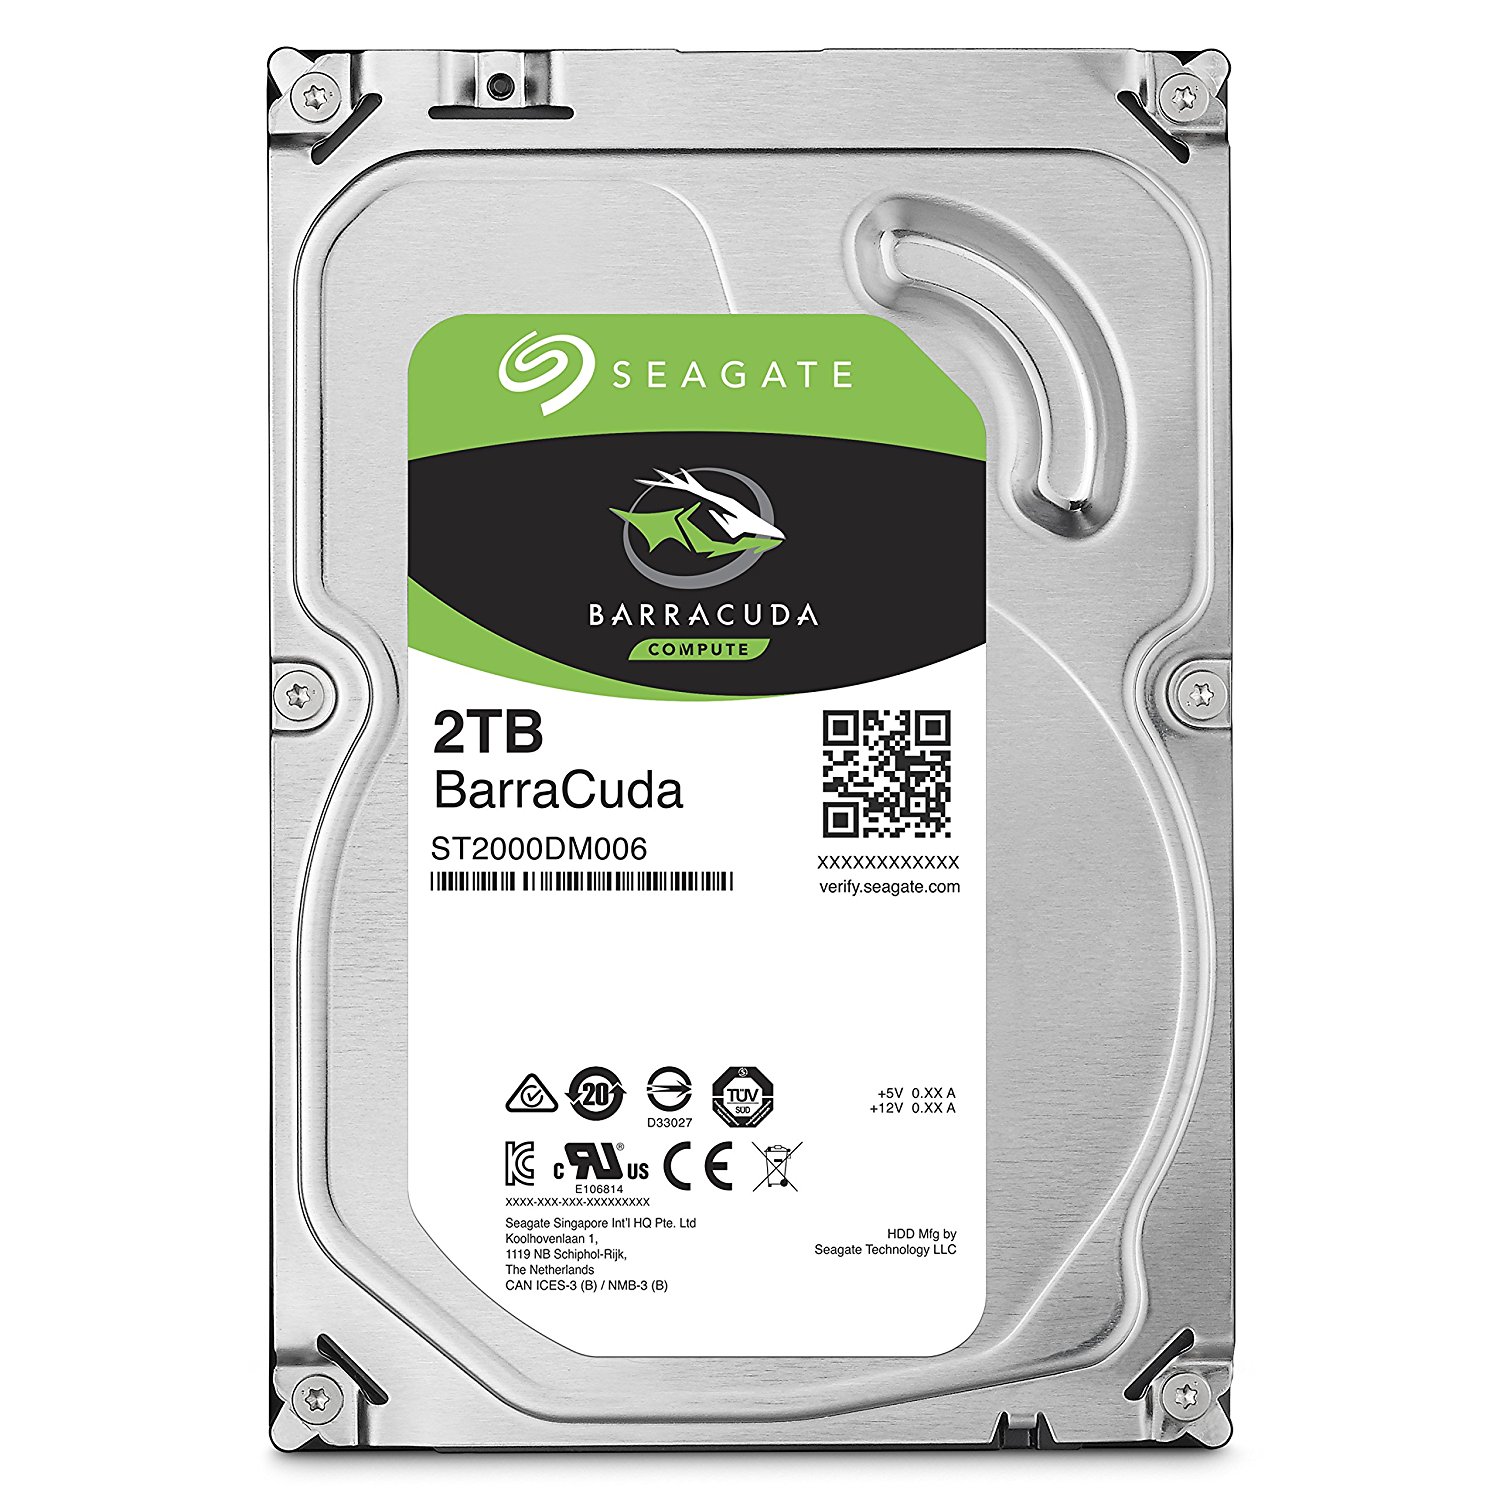 Products - Seagate | Help Tech Co. Ltd